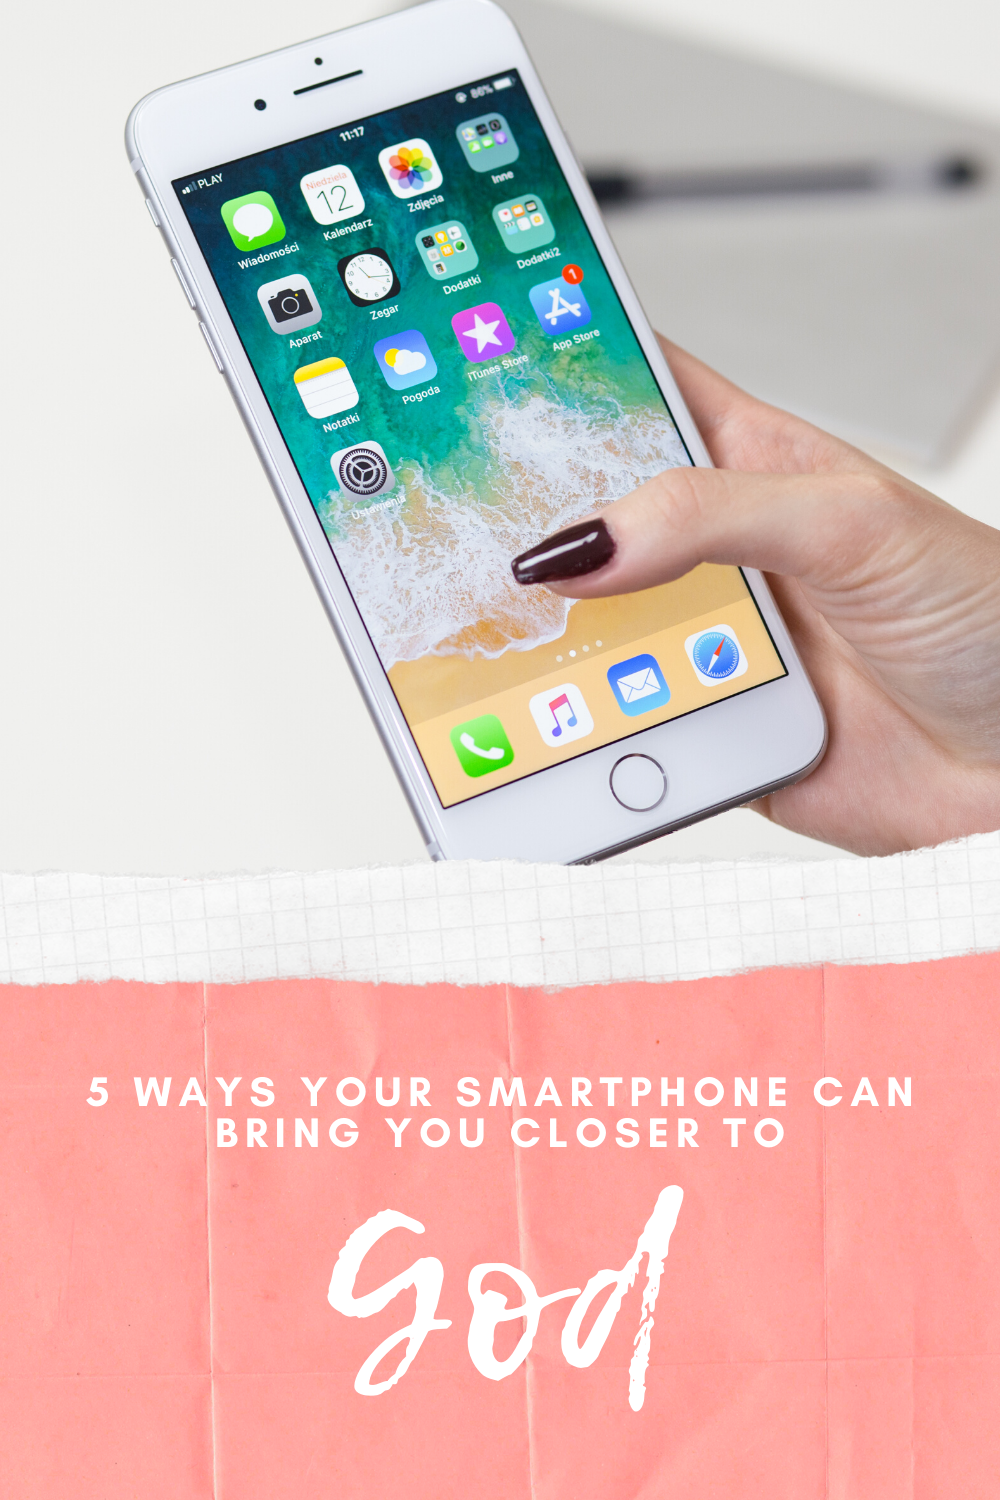 Bible Verses, How to use your smartphone to get closer to God, 5 ways your smartphone can bring you closer to God, Draw near to God